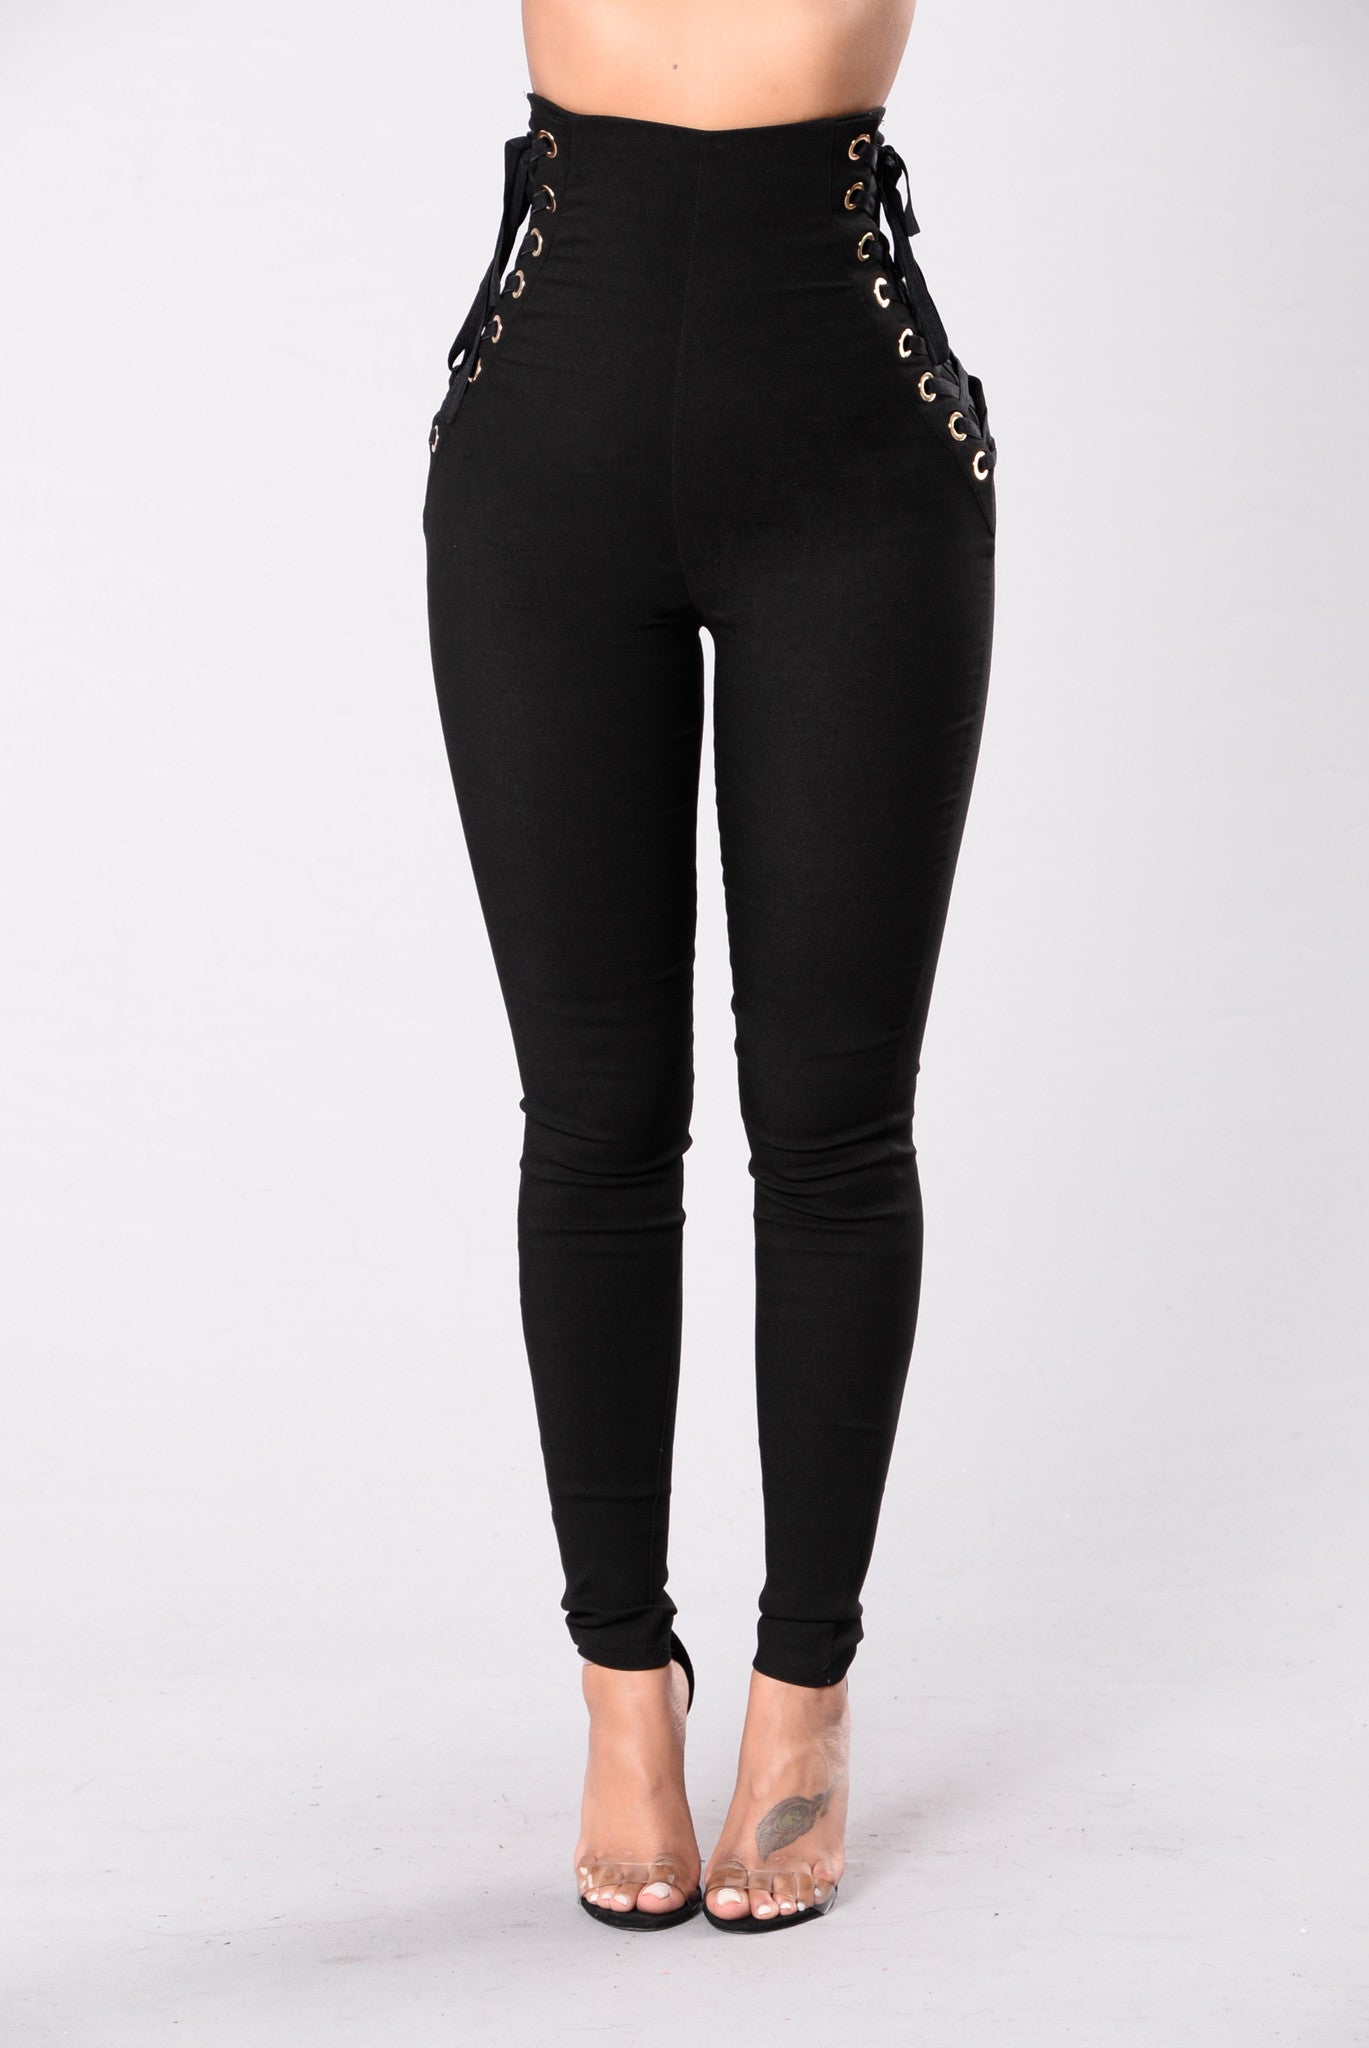 Pull Up Real Fast Pants - Black